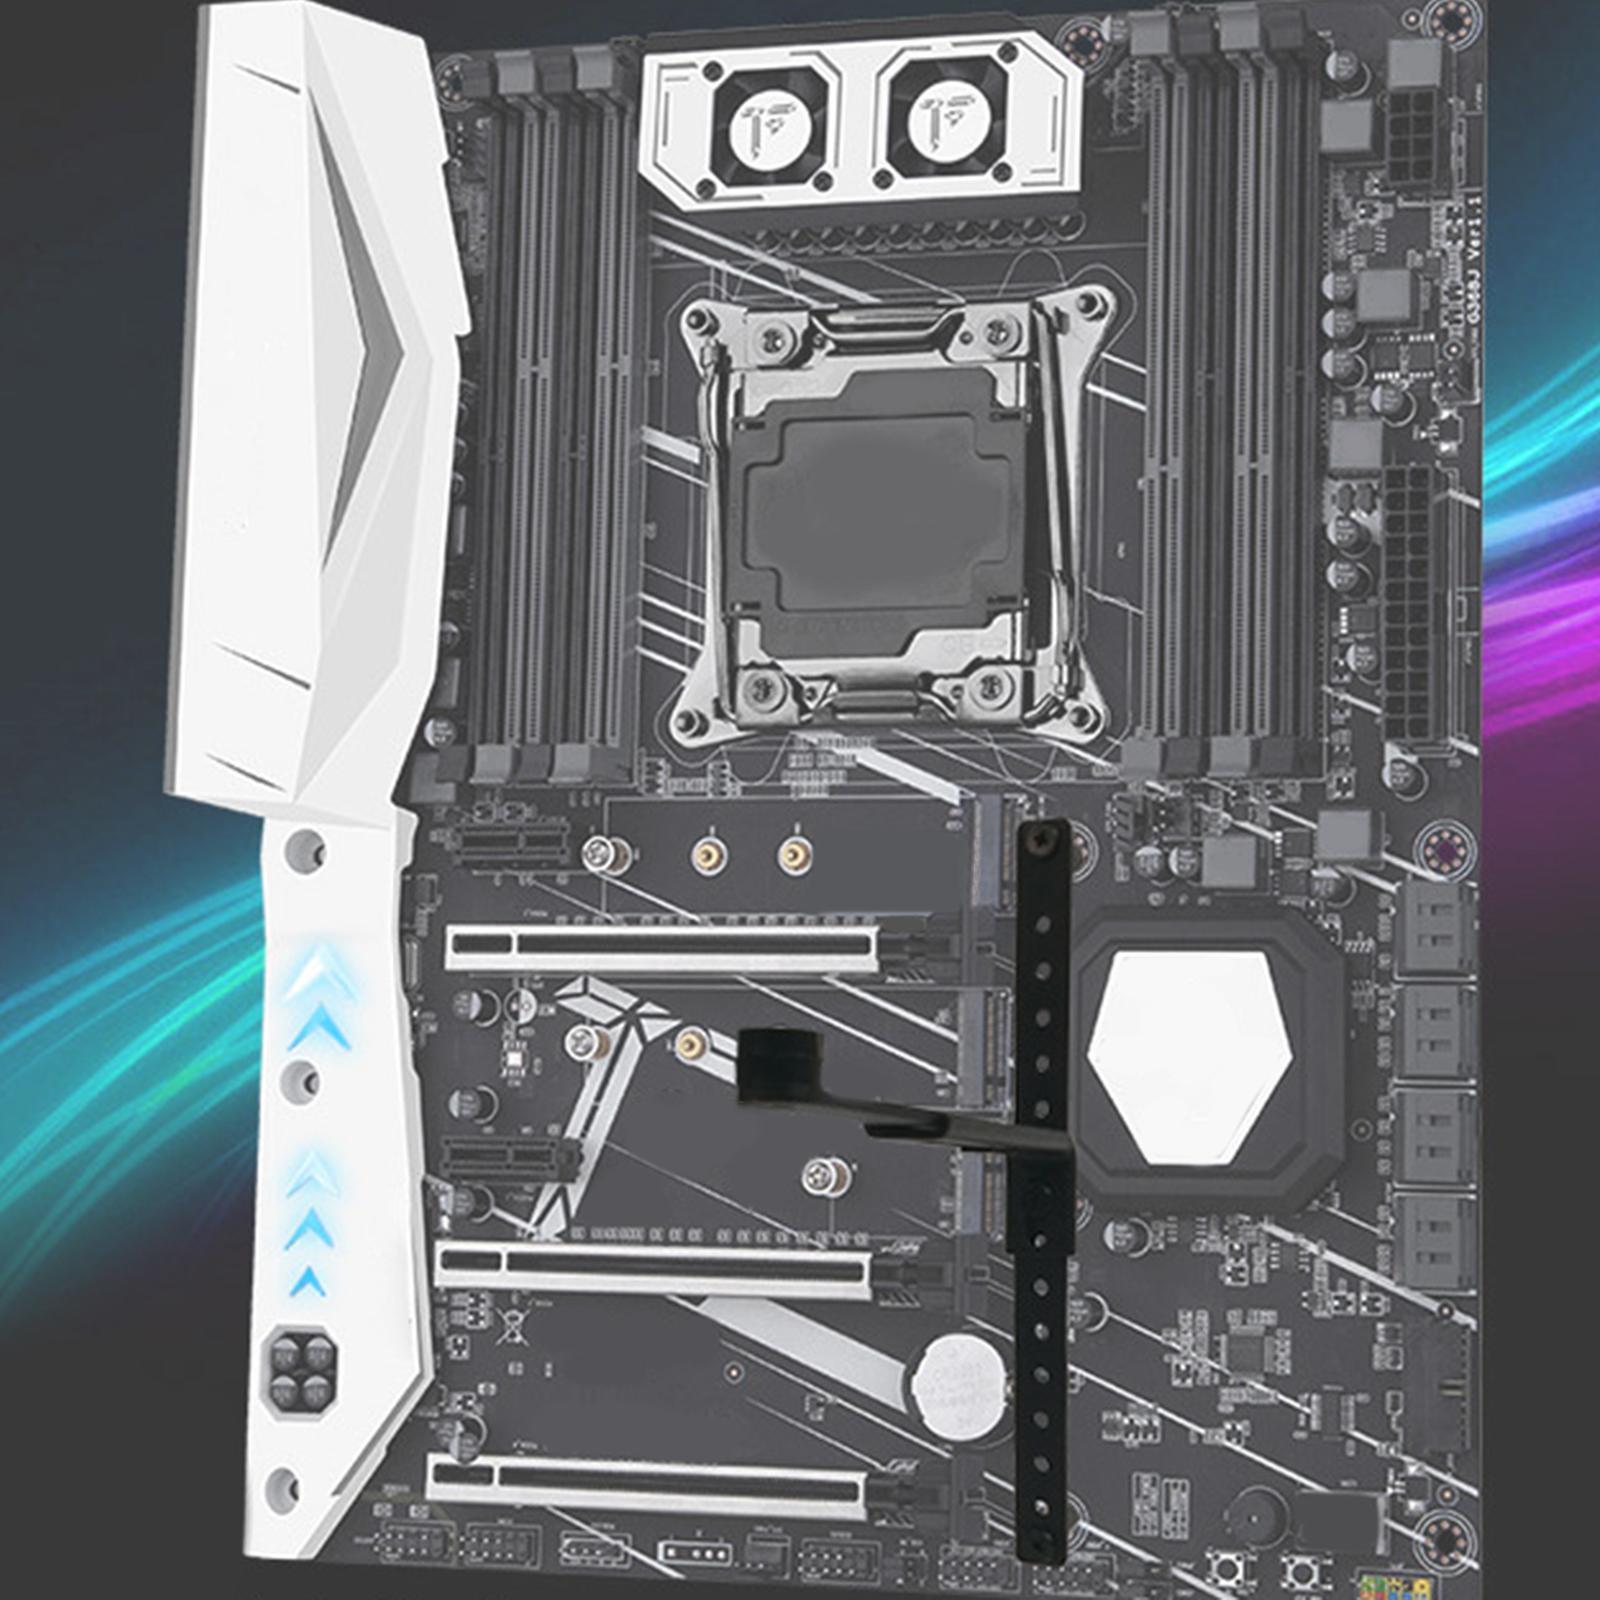 Computer Graphics Card GPU Holder Adjustable Support Stand for Motherboard